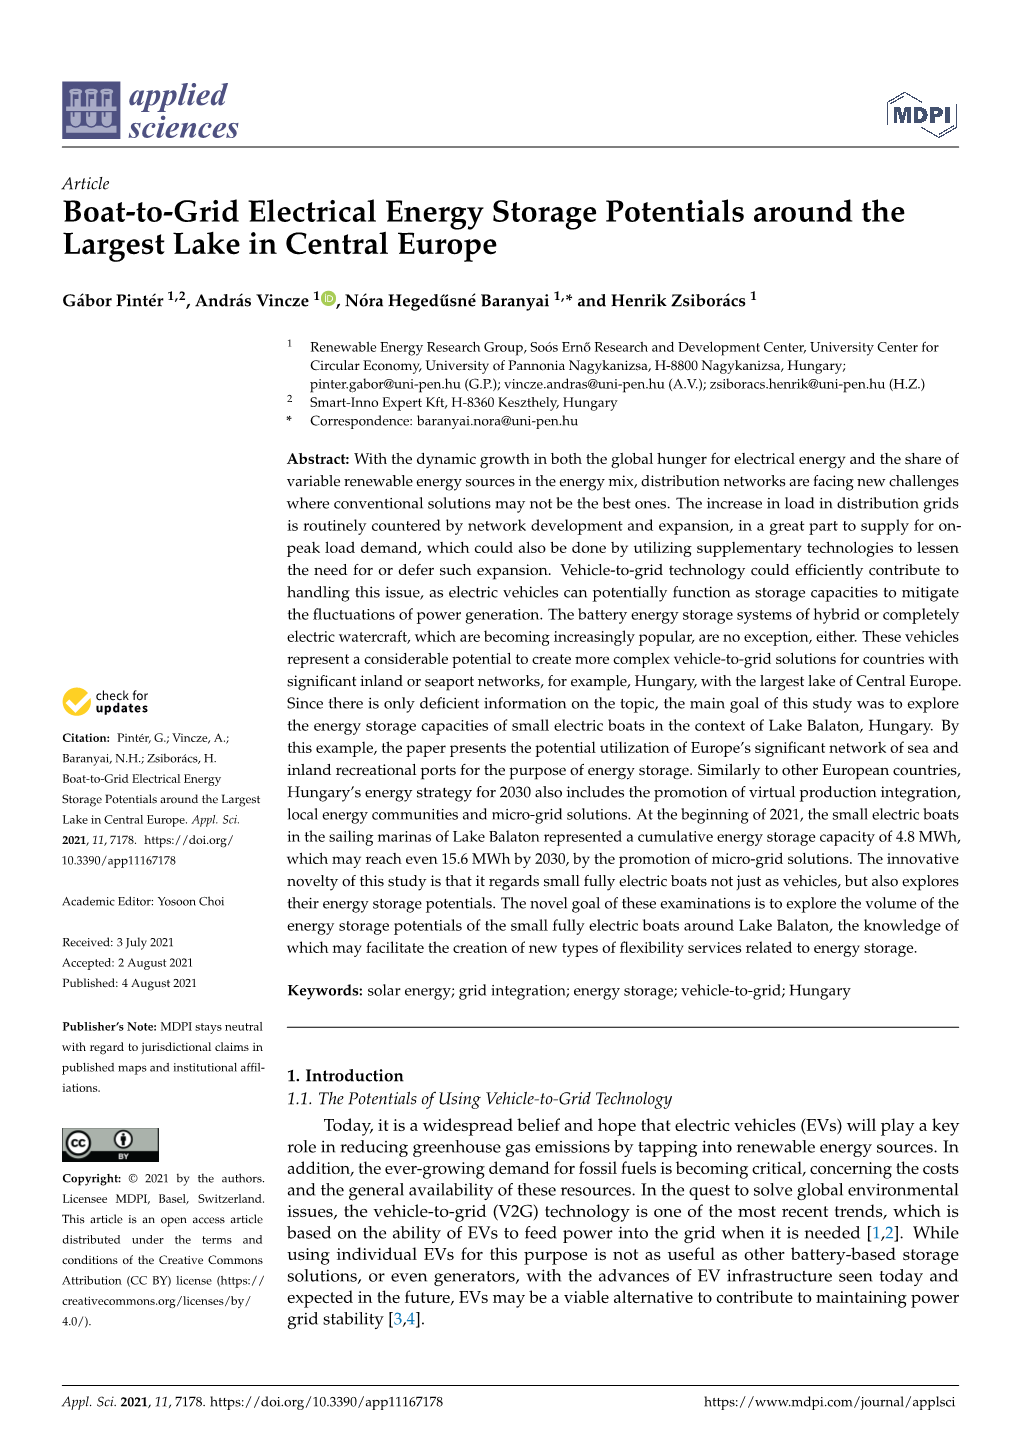 Boat-To-Grid Electrical Energy Storage Potentials Around the Largest Lake in Central Europe